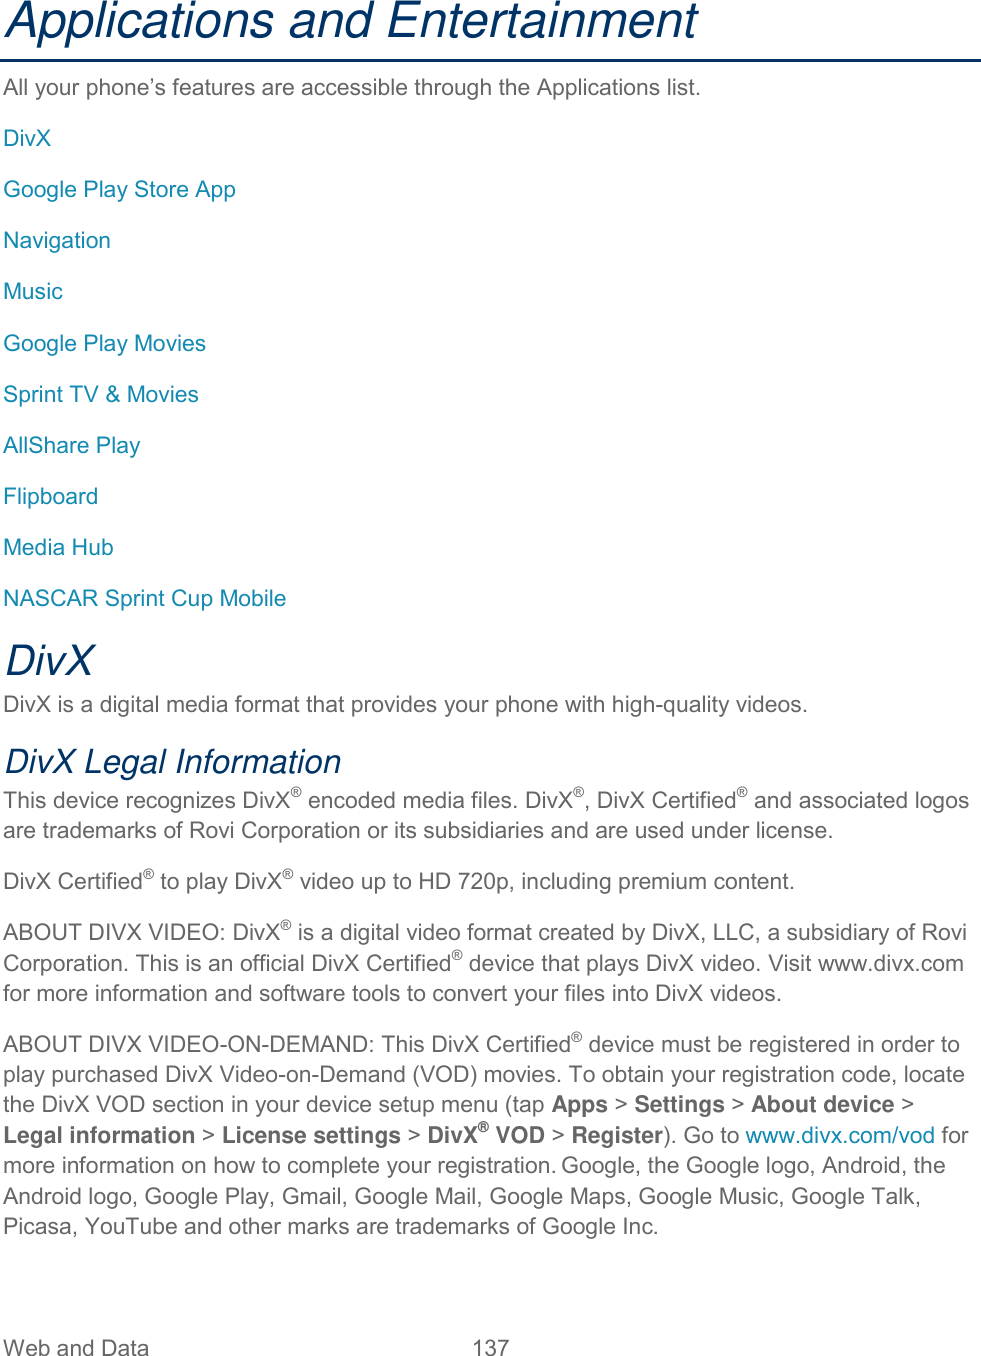 Web and Data  137   Applications and Entertainment All your phone’s features are accessible through the Applications list. DivX Google Play Store App Navigation Music Google Play Movies Sprint TV &amp; Movies AllShare Play Flipboard Media Hub NASCAR Sprint Cup Mobile DivX DivX is a digital media format that provides your phone with high-quality videos. DivX Legal Information This device recognizes DivX® encoded media files. DivX®, DivX Certified® and associated logos are trademarks of Rovi Corporation or its subsidiaries and are used under license. DivX Certified® to play DivX® video up to HD 720p, including premium content.  ABOUT DIVX VIDEO: DivX® is a digital video format created by DivX, LLC, a subsidiary of Rovi Corporation. This is an official DivX Certified® device that plays DivX video. Visit www.divx.com for more information and software tools to convert your files into DivX videos.ABOUT DIVX VIDEO-ON-DEMAND: This DivX Certified® device must be registered in order to play purchased DivX Video-on-Demand (VOD) movies. To obtain your registration code, locate the DivX VOD section in your device setup menu (tap Apps &gt; Settings &gt; About device &gt; Legal information &gt; License settings &gt; DivX® VOD &gt; Register). Go to www.divx.com/vod for more information on how to complete your registration. Google, the Google logo, Android, the Android logo, Google Play, Gmail, Google Mail, Google Maps, Google Music, Google Talk, Picasa, YouTube and other marks are trademarks of Google Inc.